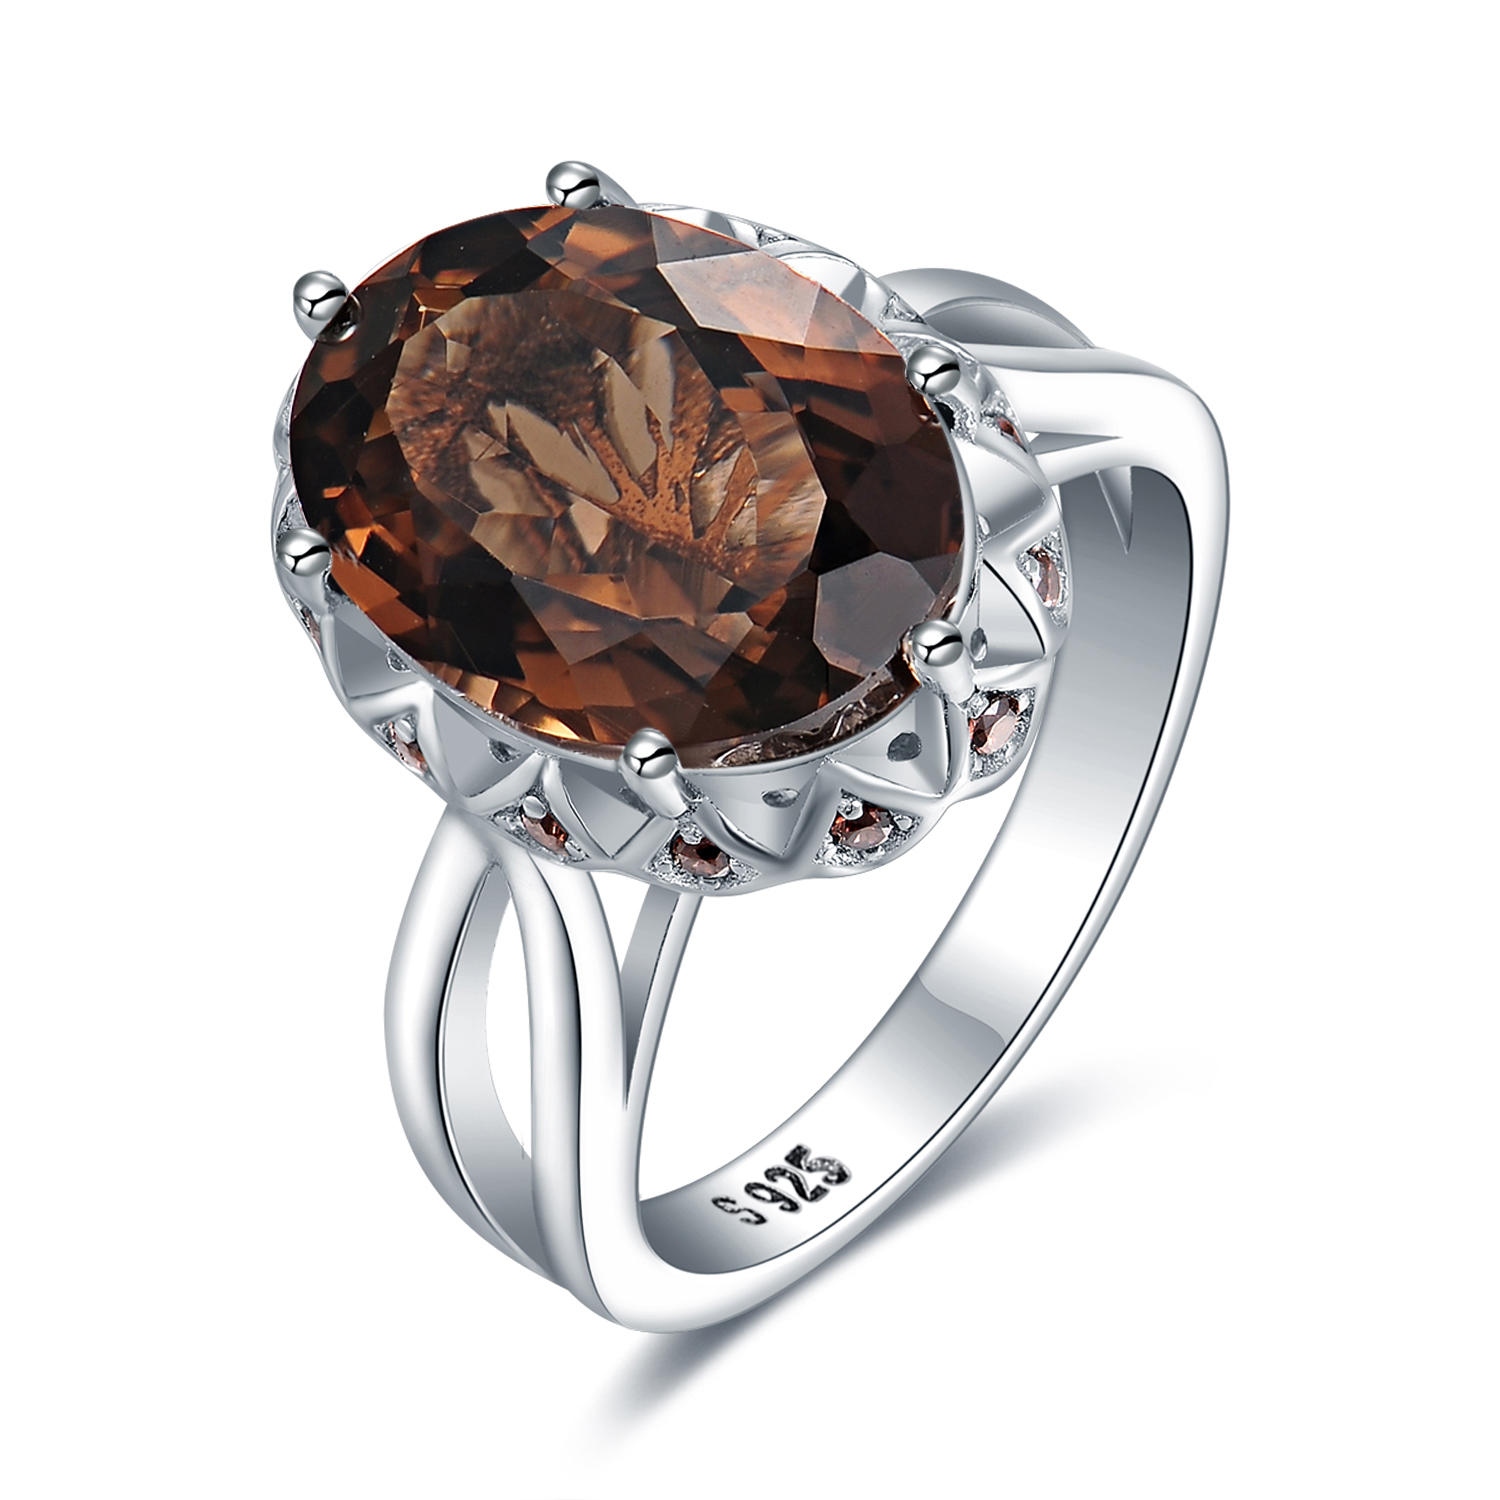 JewelryPalace 5.7ct Oval Shape Created Smoky Quartz Solitaire Cocktail Ring 925 Sterling Silver